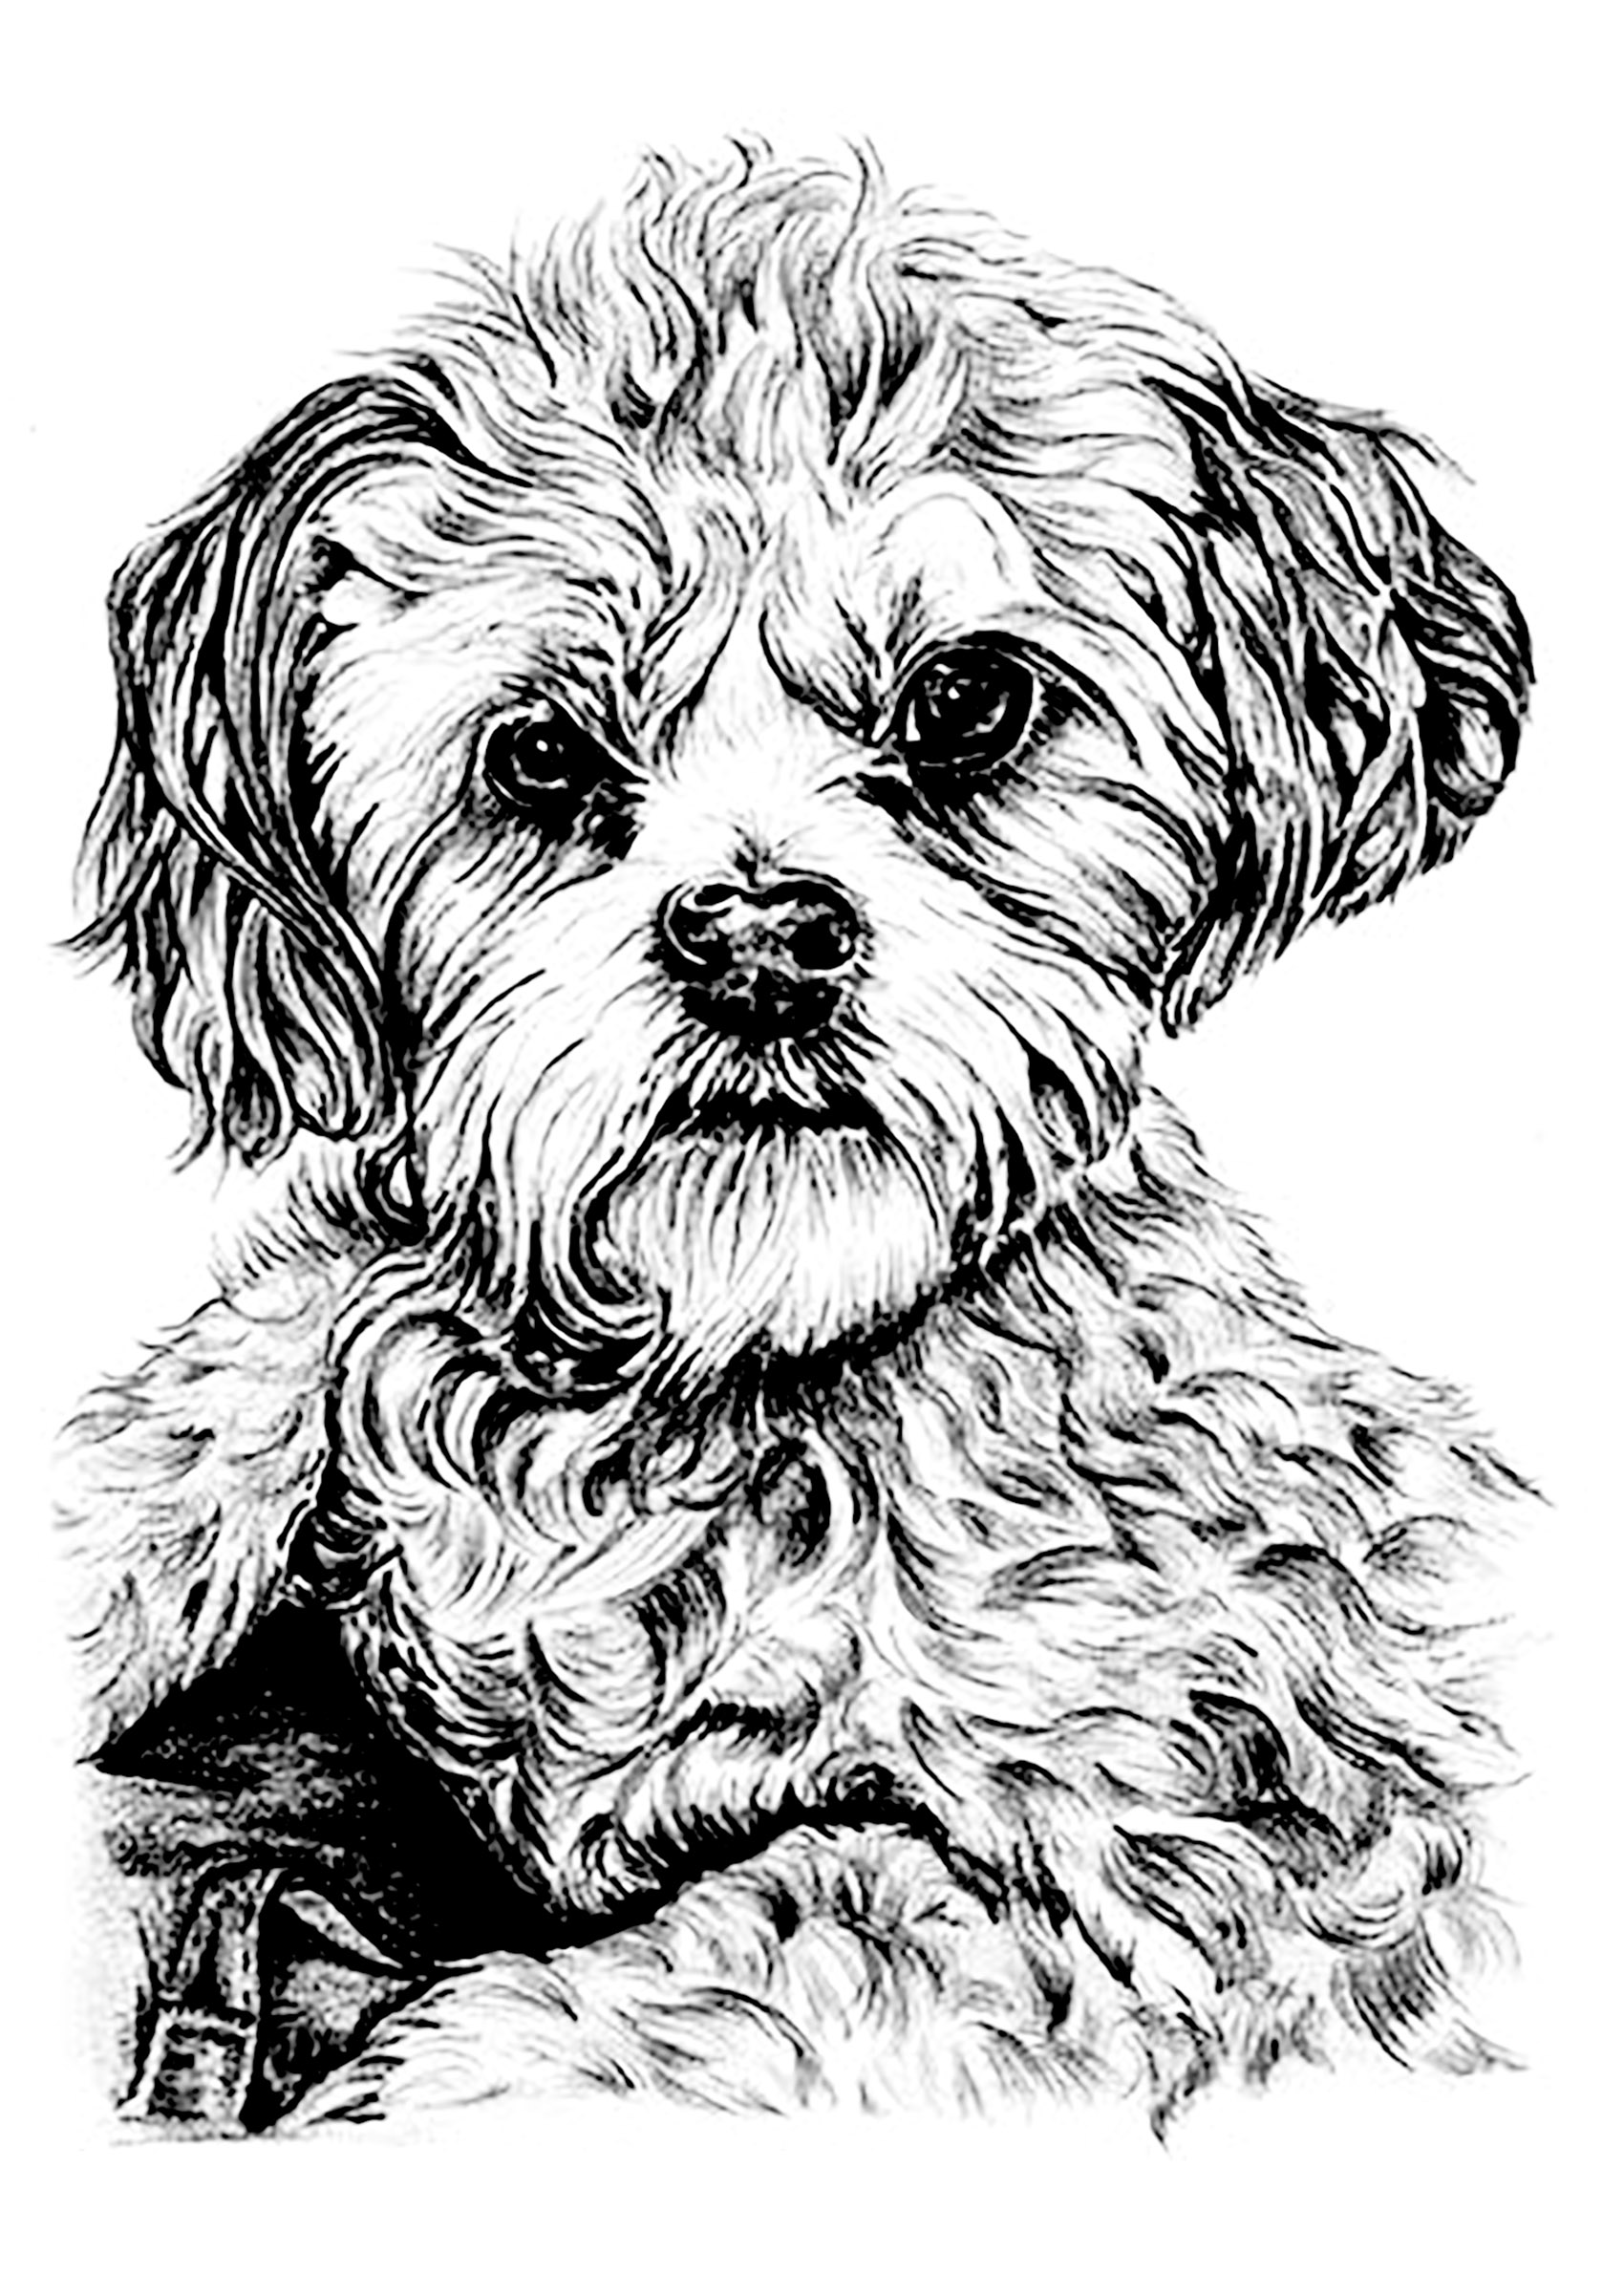 Dog for kids - Dogs Kids Coloring Pages